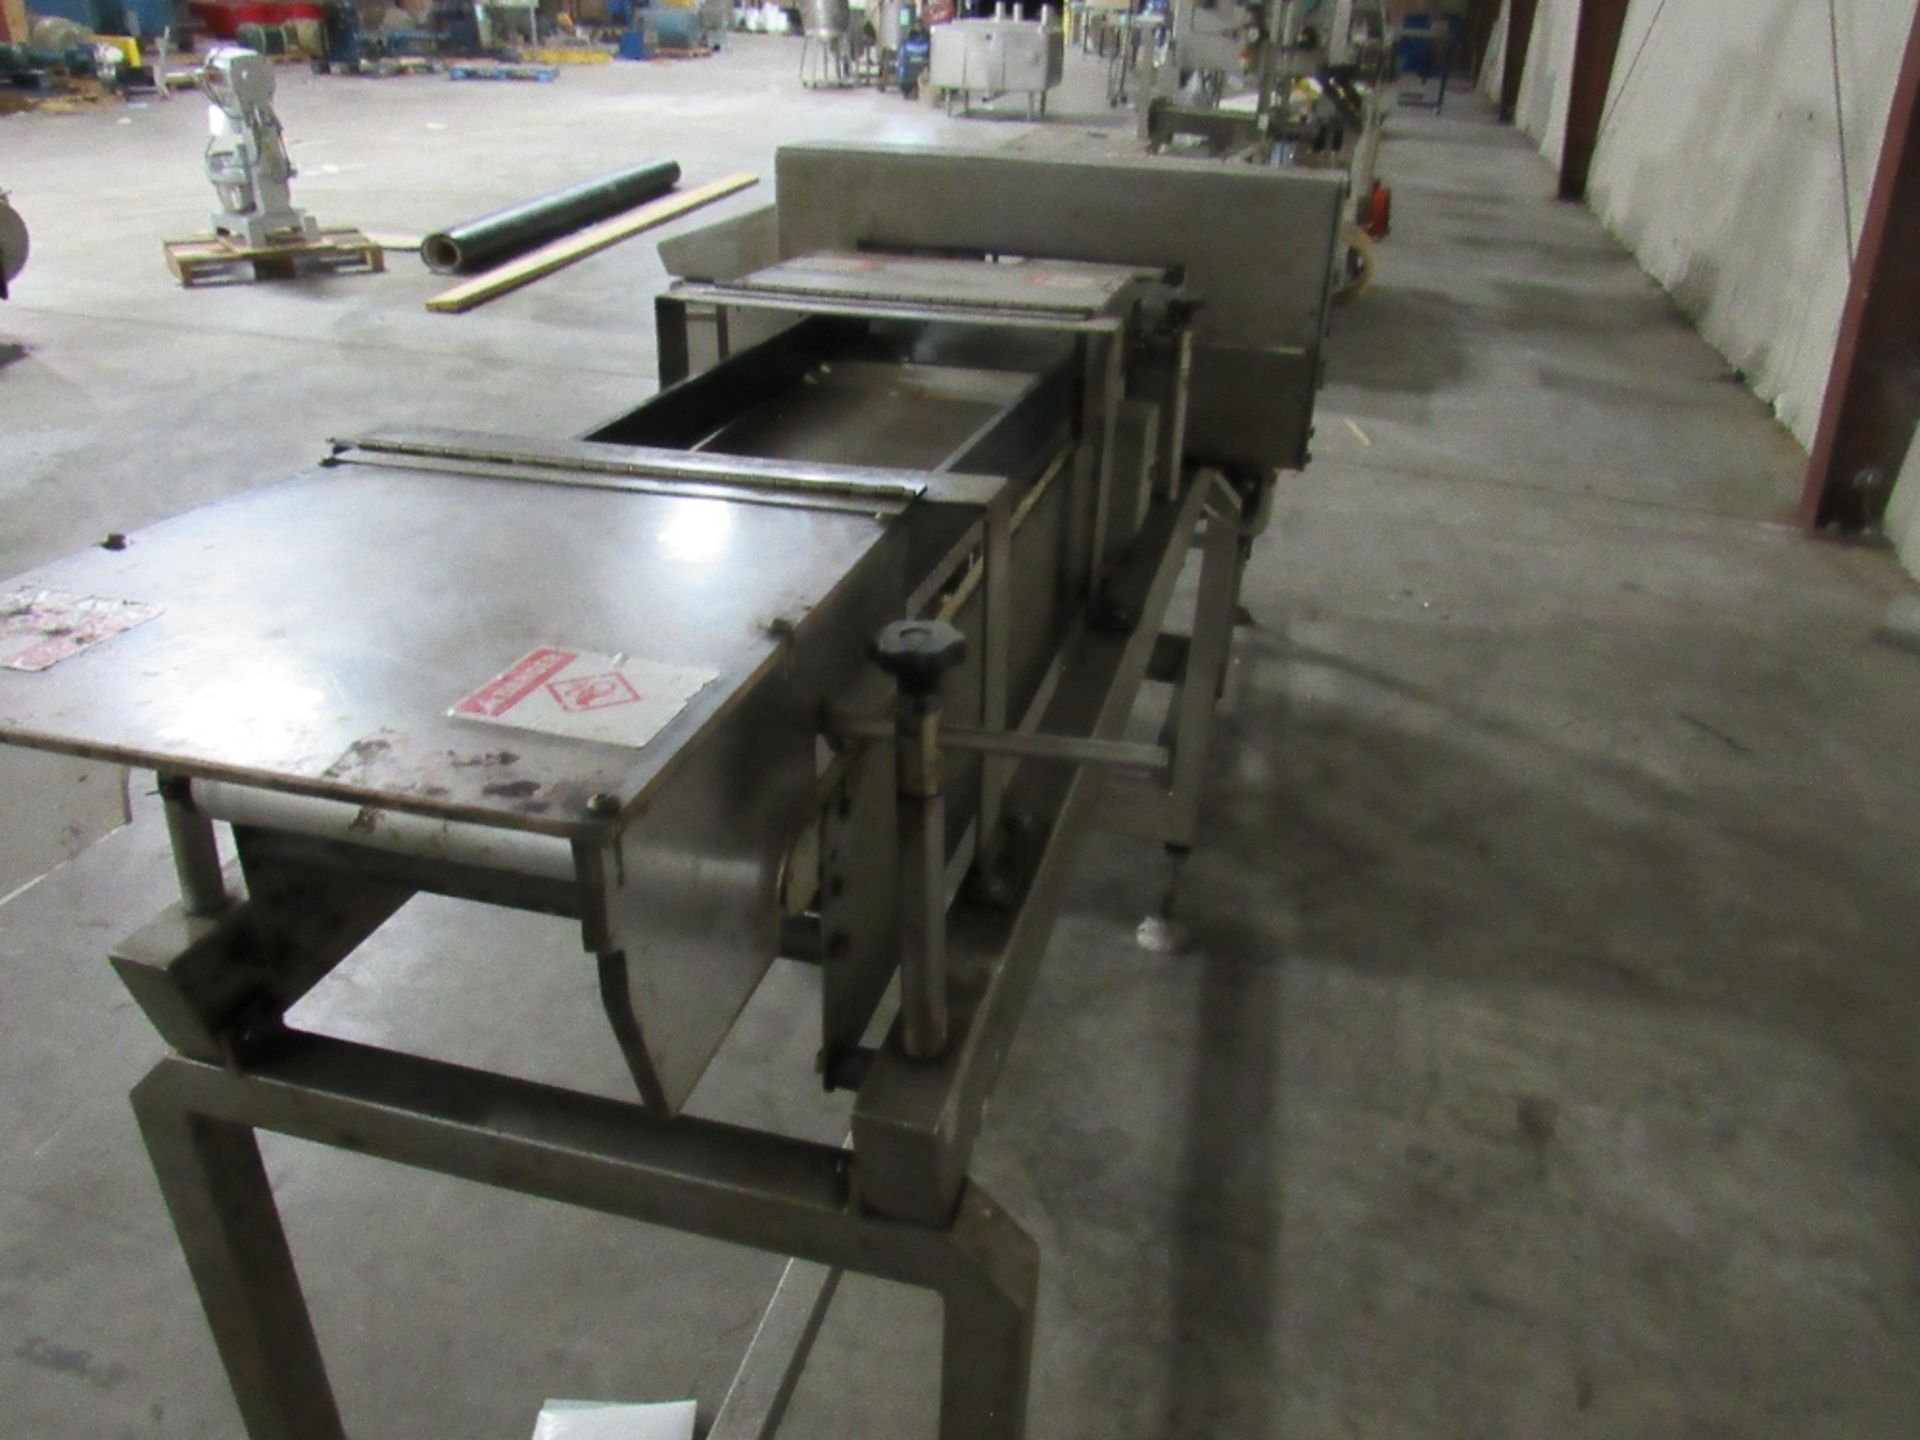 Loma 7000 Staginess Steel Check weigher with built-in 7.5 gallon air tanks and product conveyor - Image 10 of 21